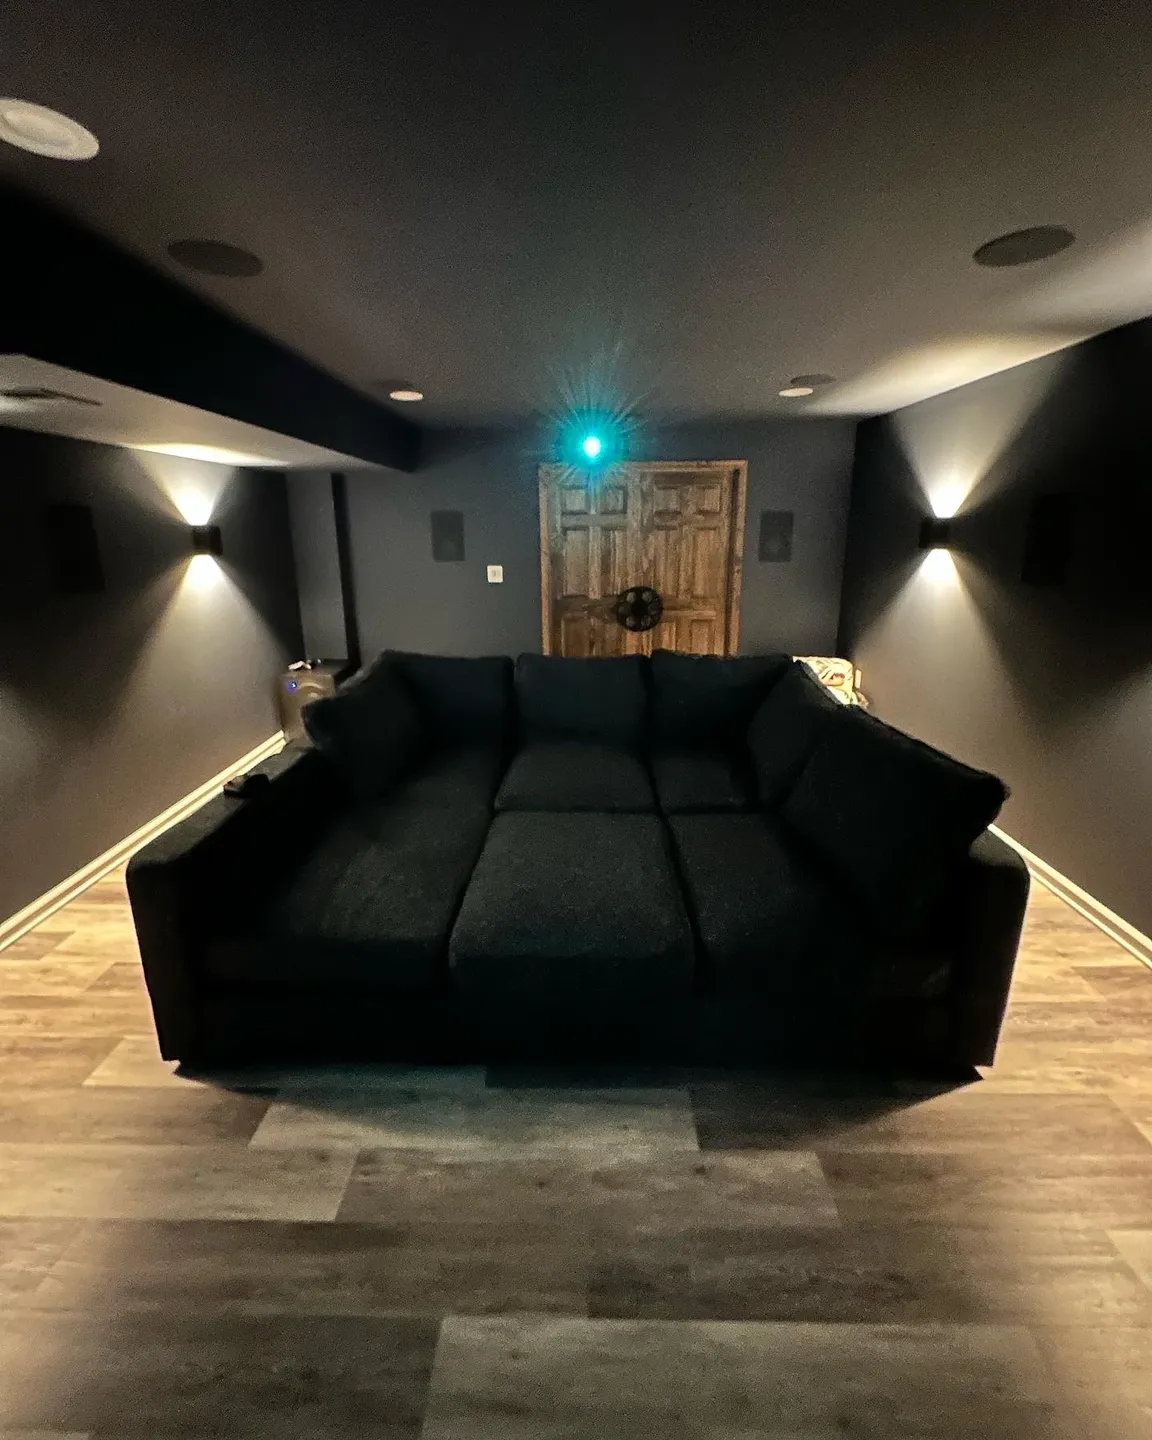 A large black couch in the middle of a room.